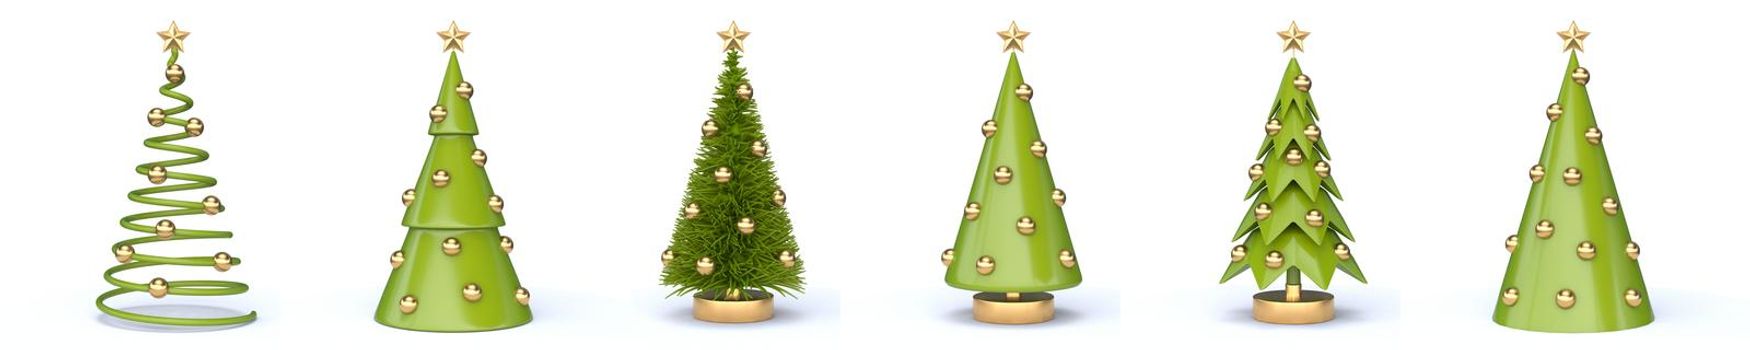 Set of Christmas trees with golden Christmas balls 3D rendering illustration isolated on white background